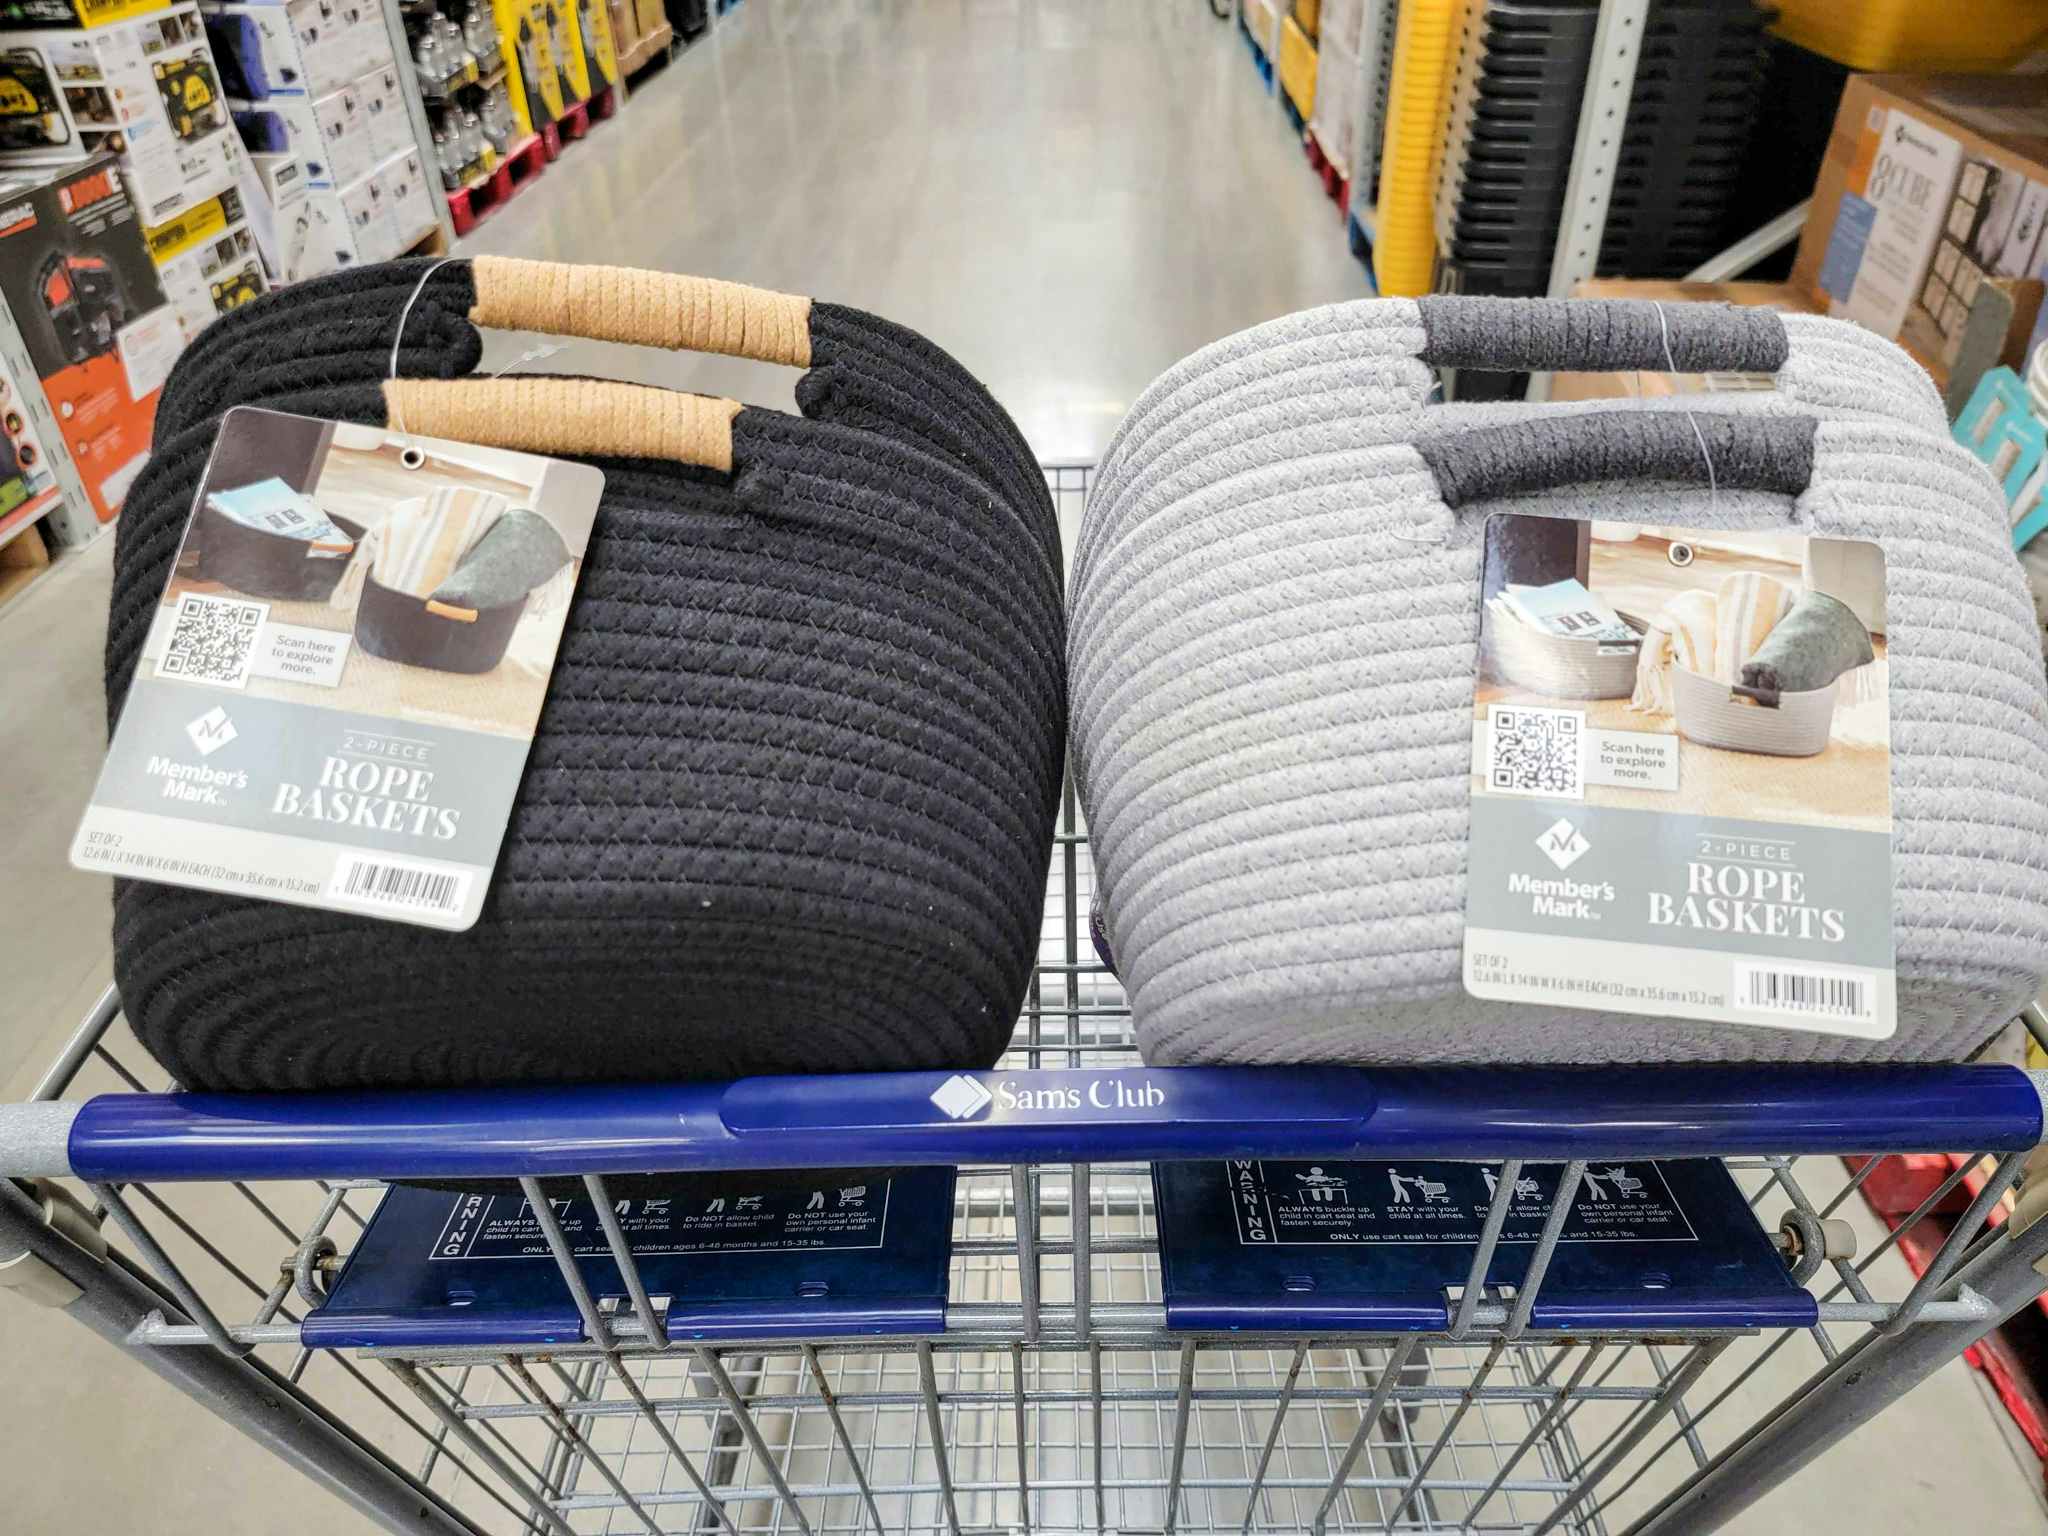 sets of black & grey rope baskets in a cart